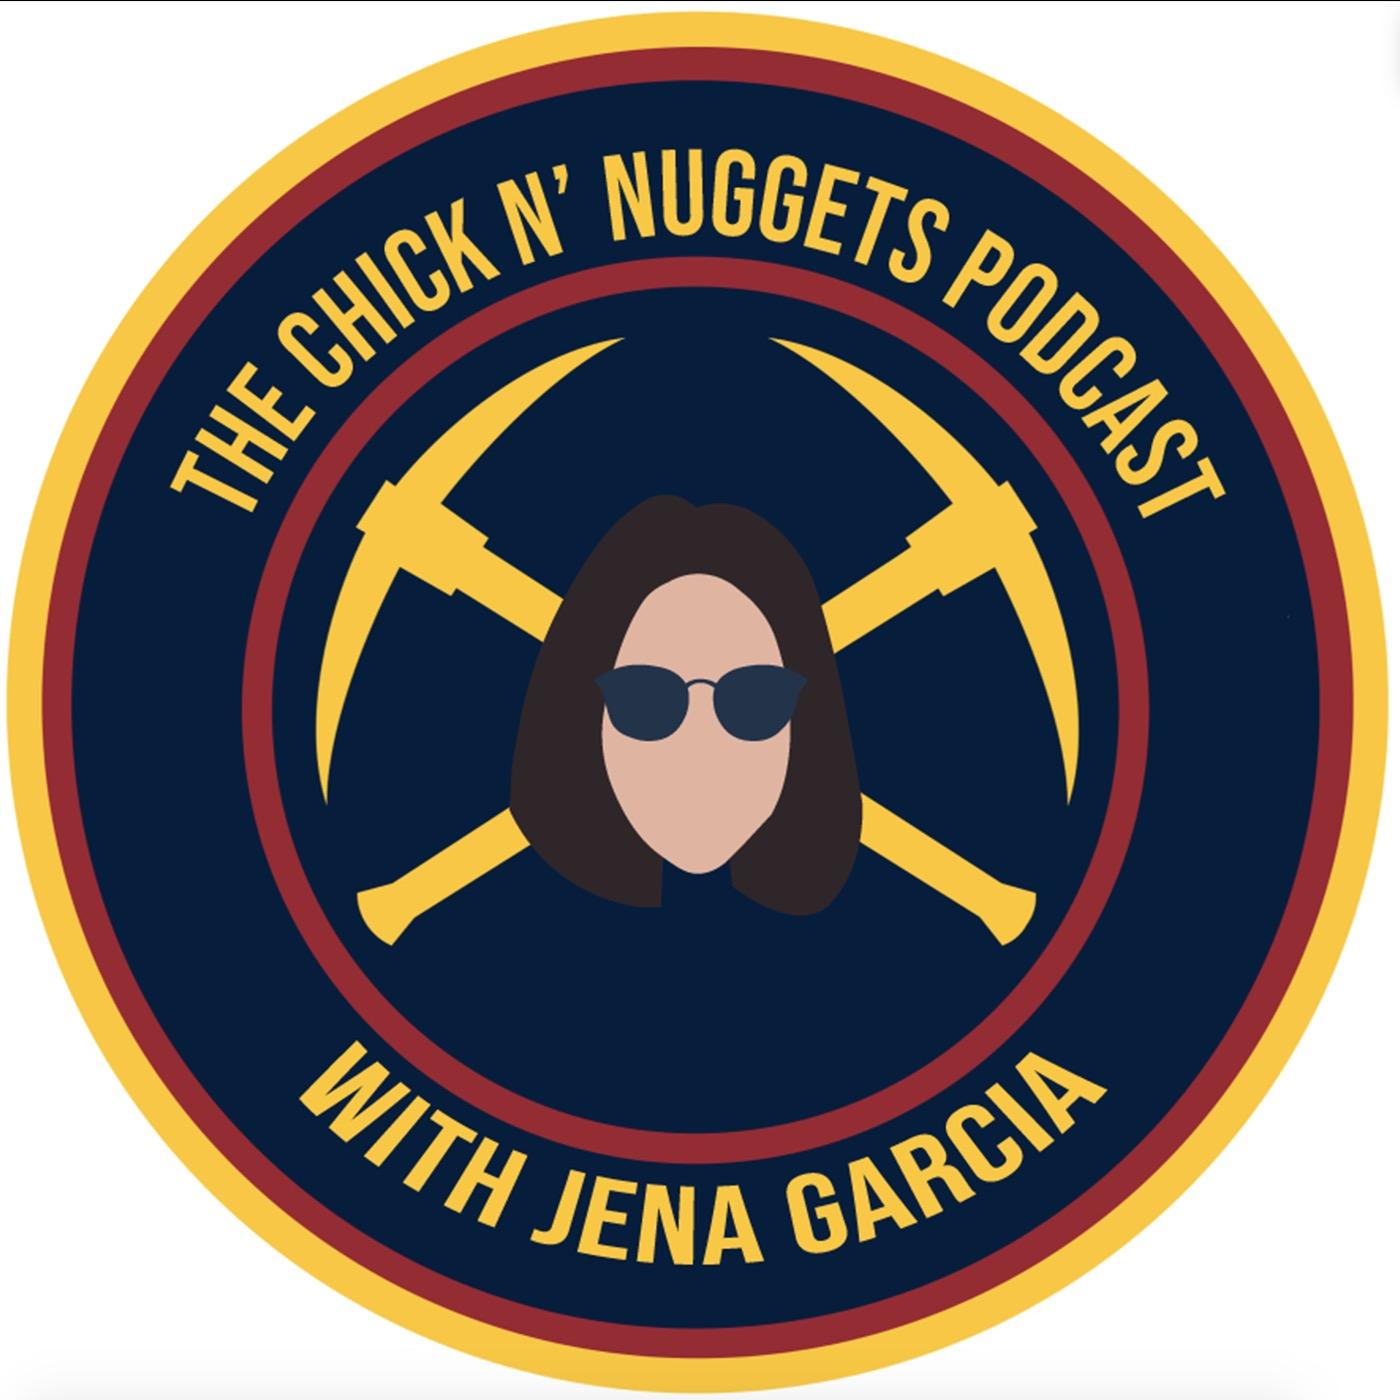 The CHICK n' Nuggets Podcast with Jena Garcia